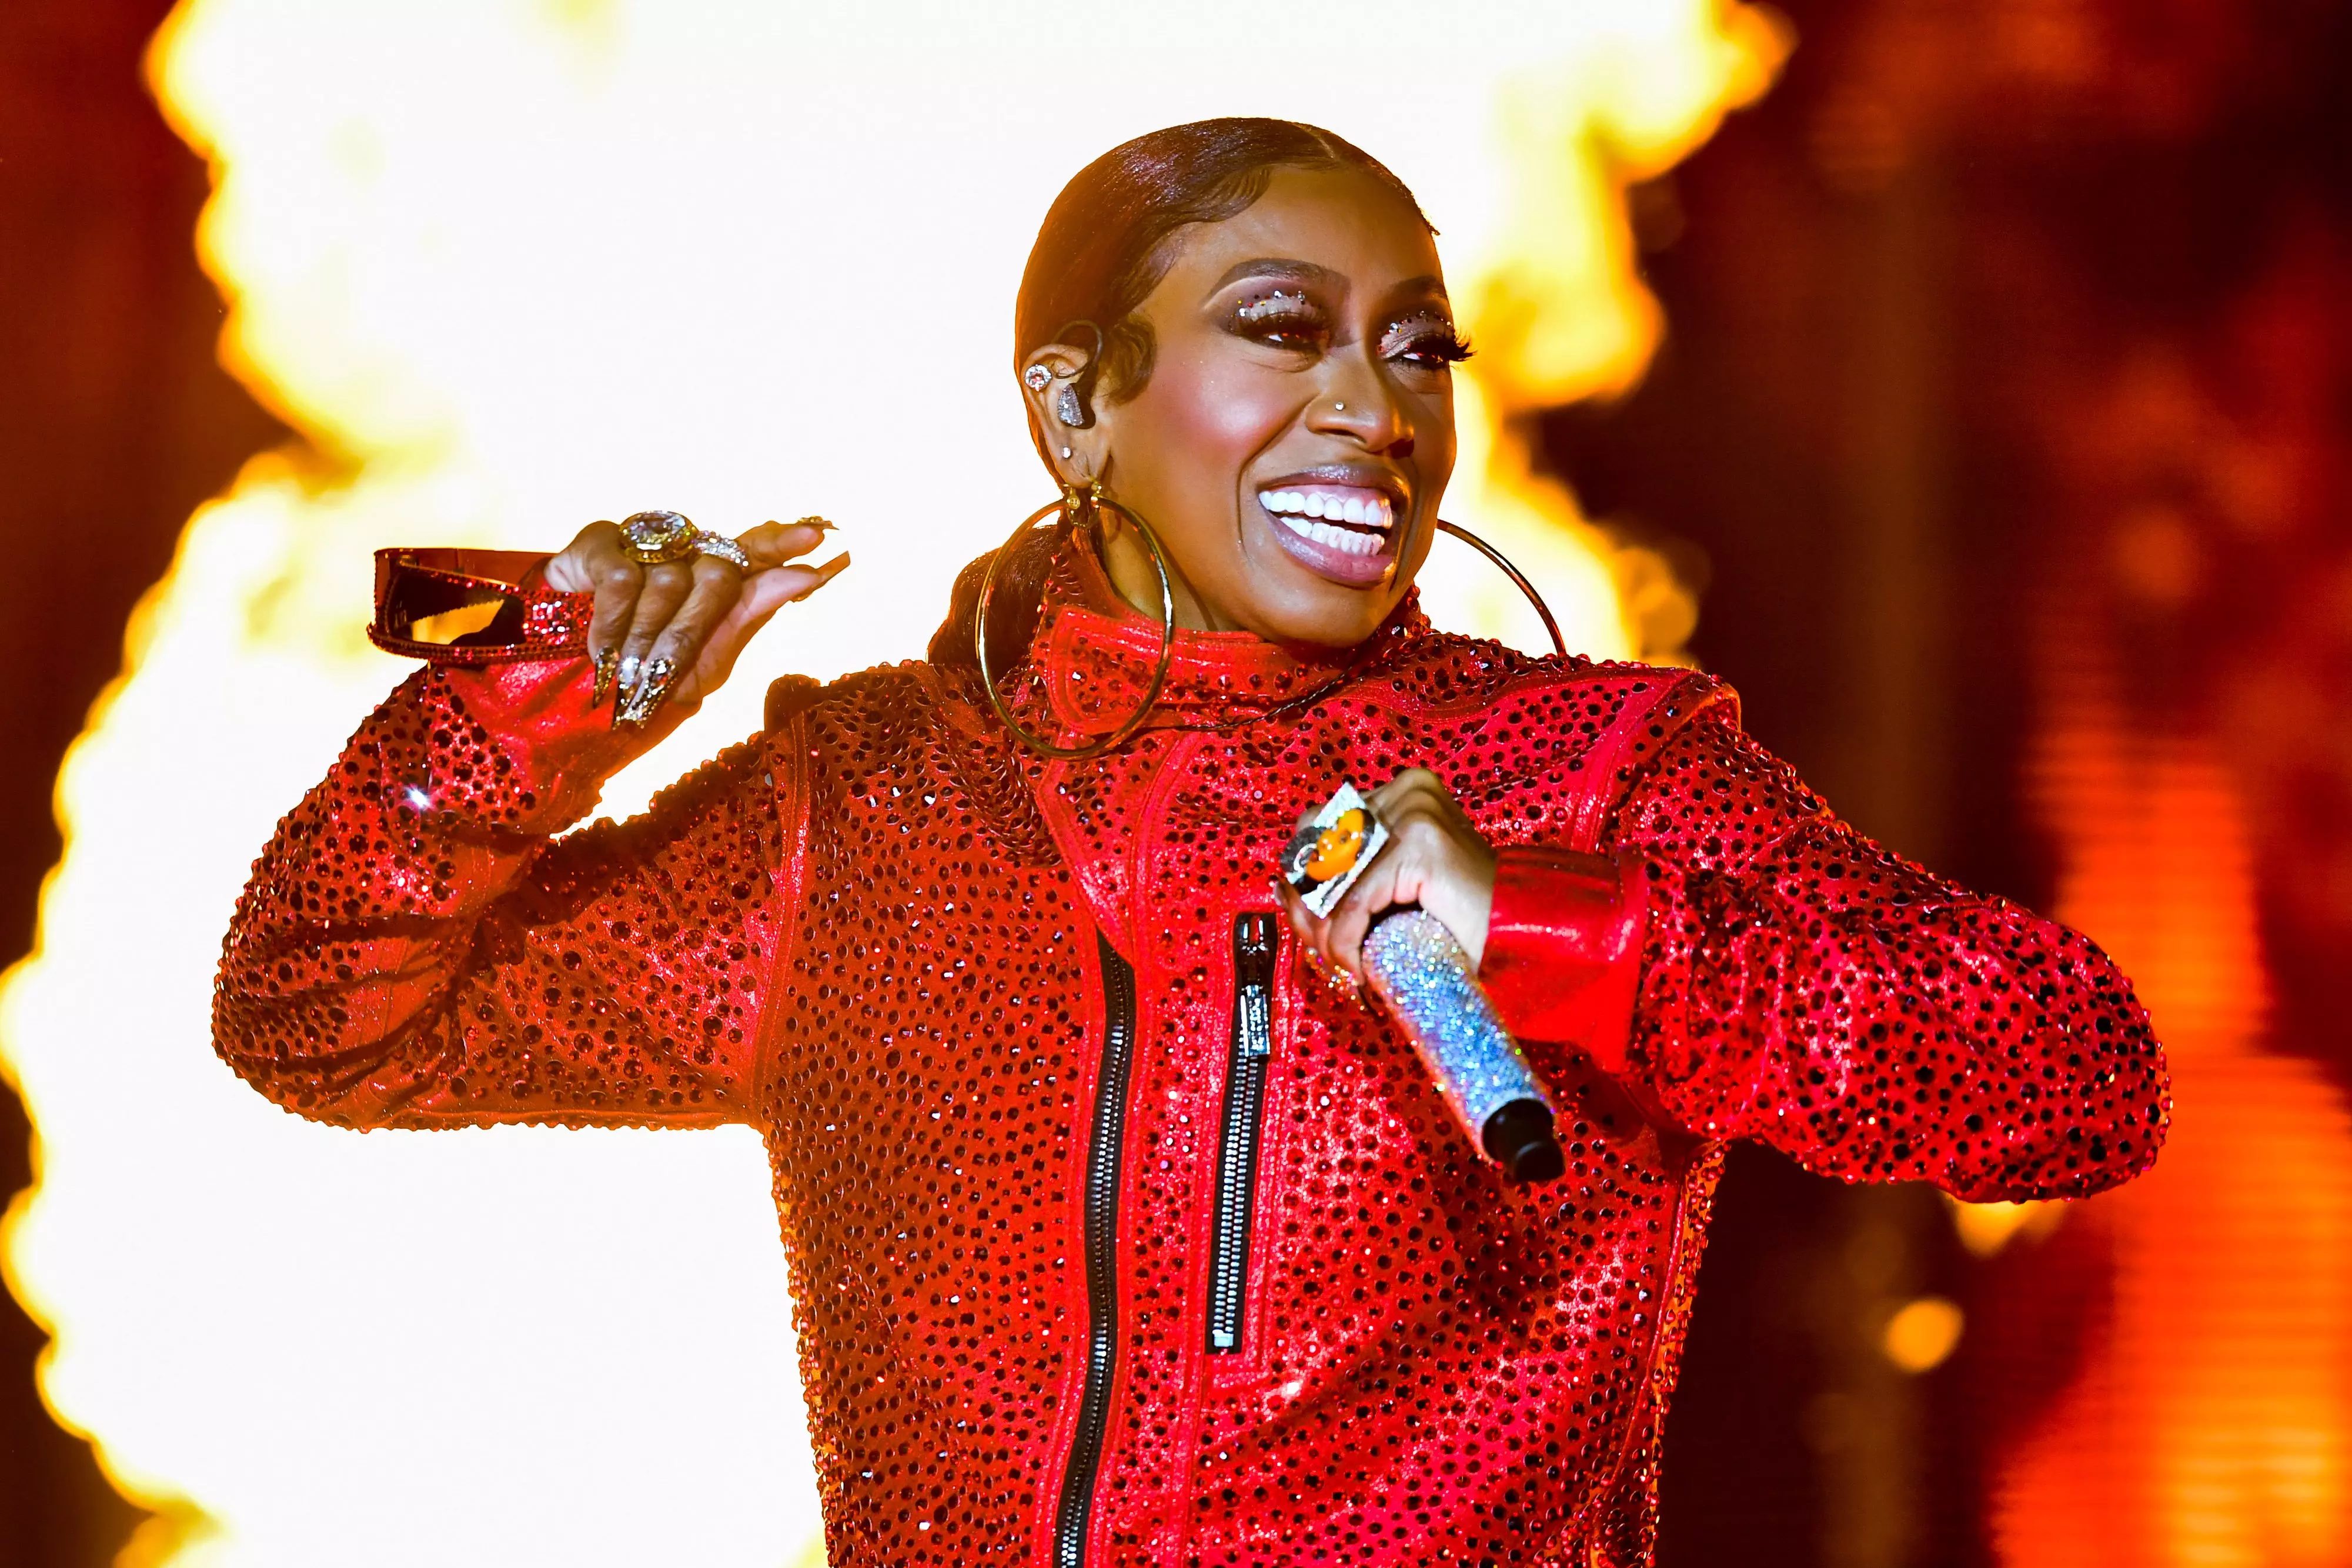 Celebrating Missy Elliott: How The Icon Changed The Sound, Look & Language Of Hip-Hop